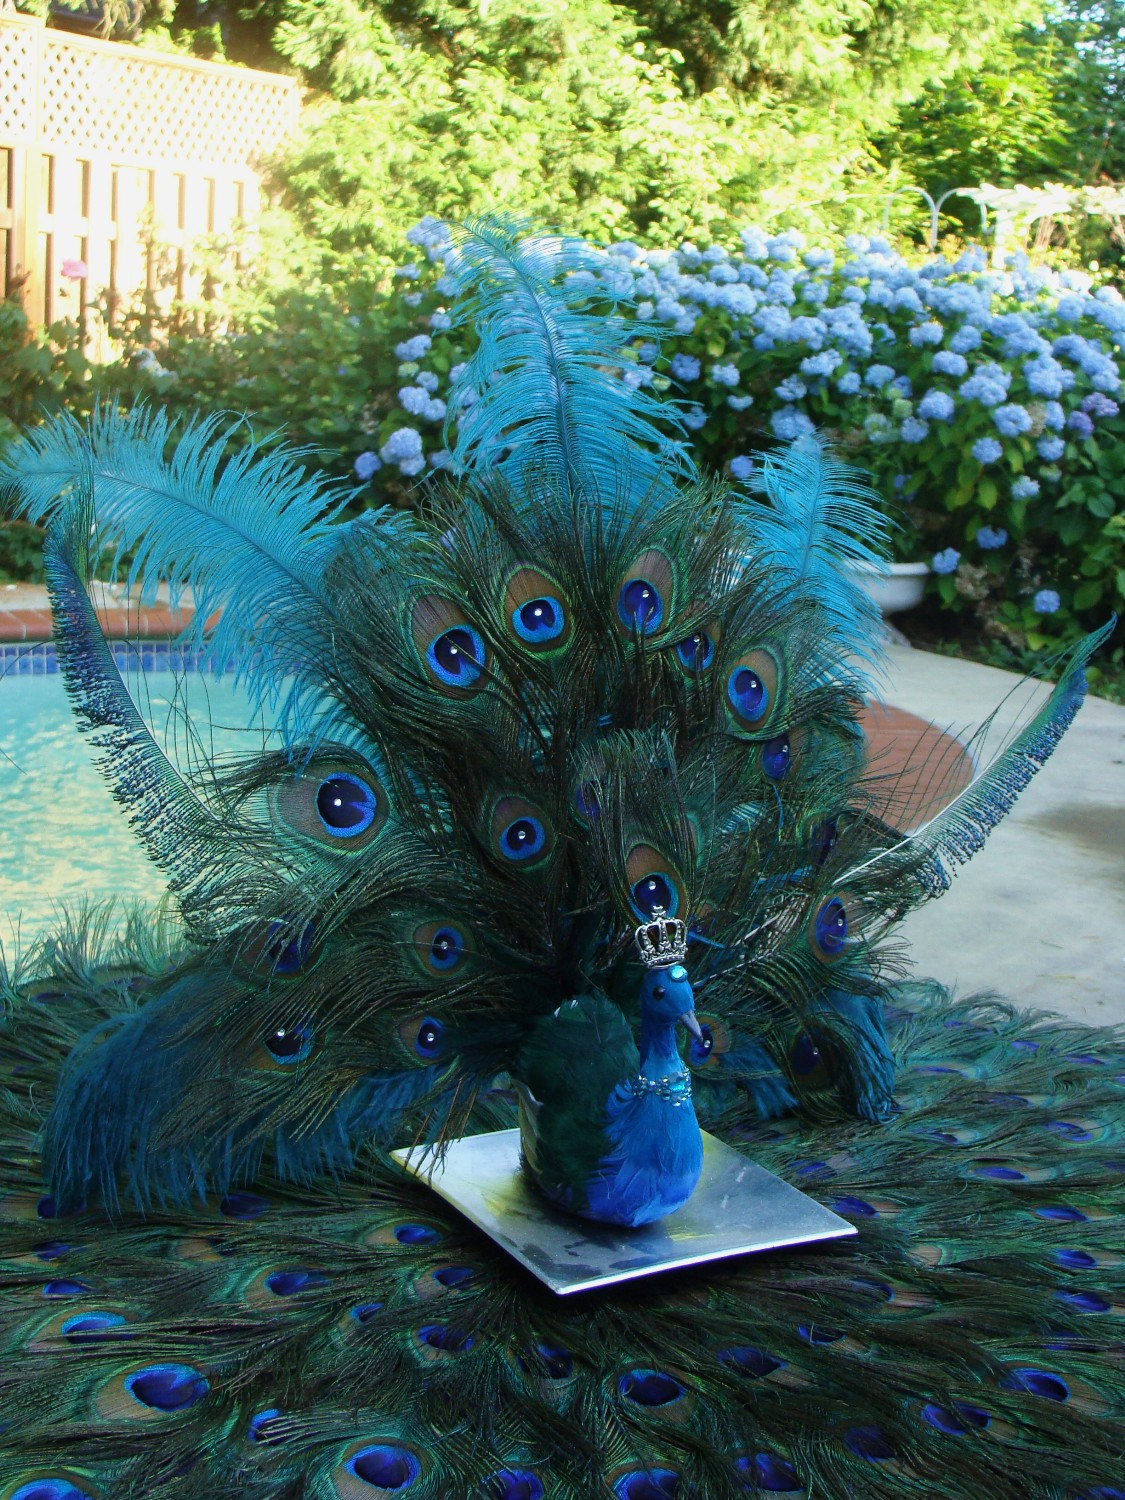 Peacock Decorations For Wedding
 His Royal Majesty peacock wedding decoration in your choice of